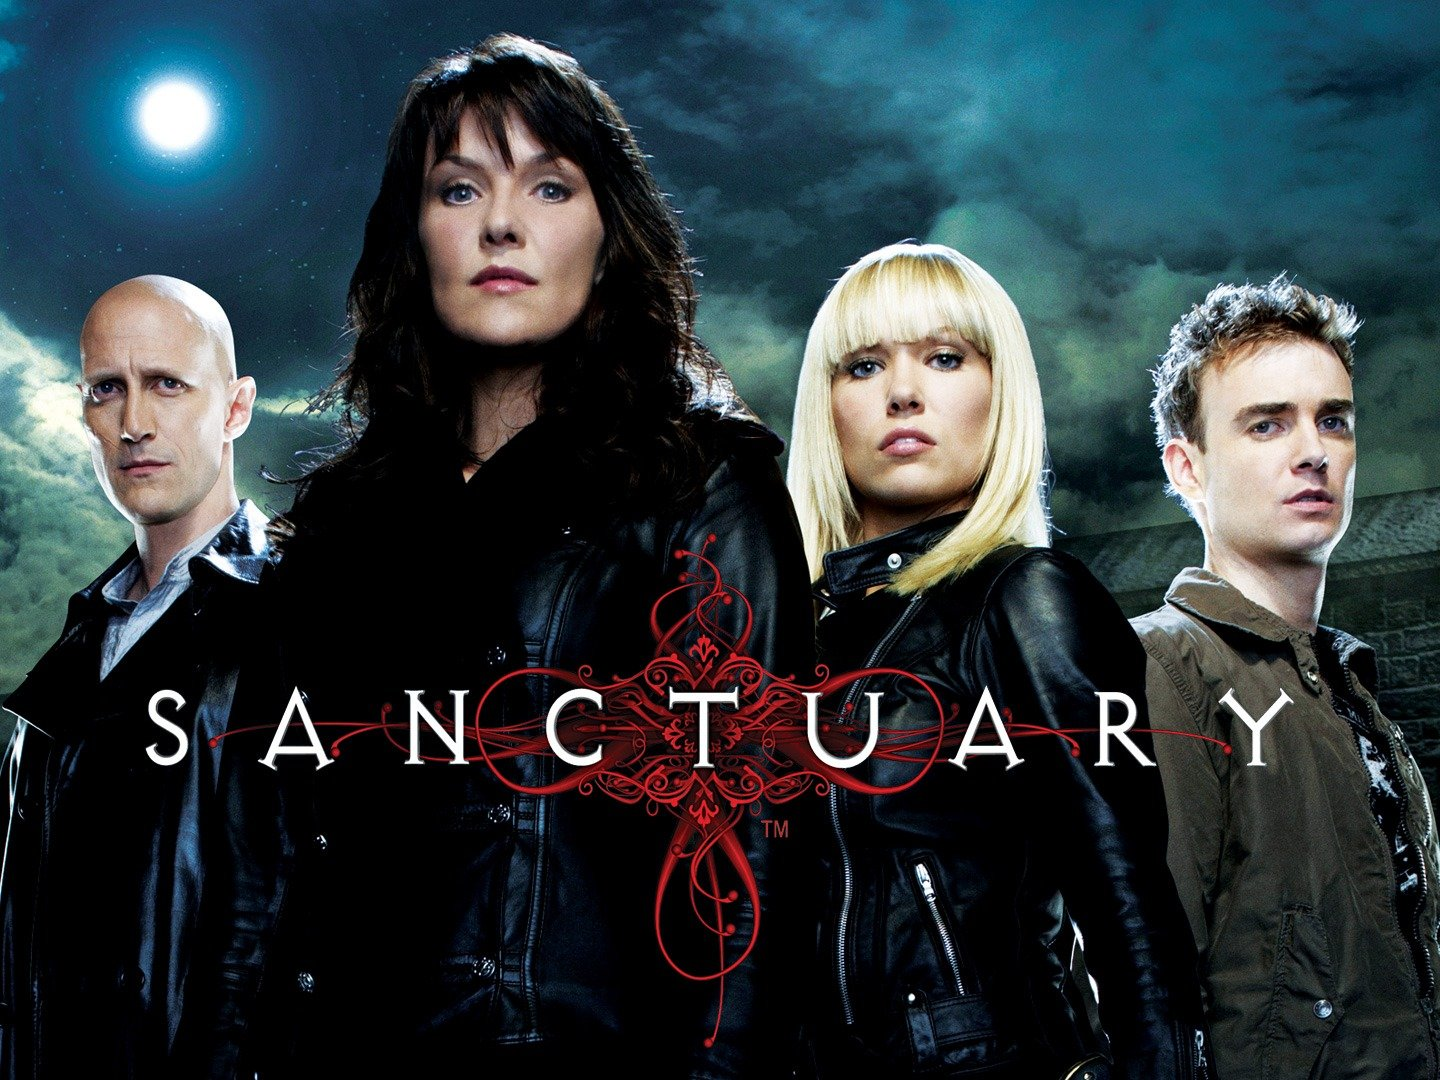 The main characters of sanctuary lined up in fornt of a full moon during a cloudy night.